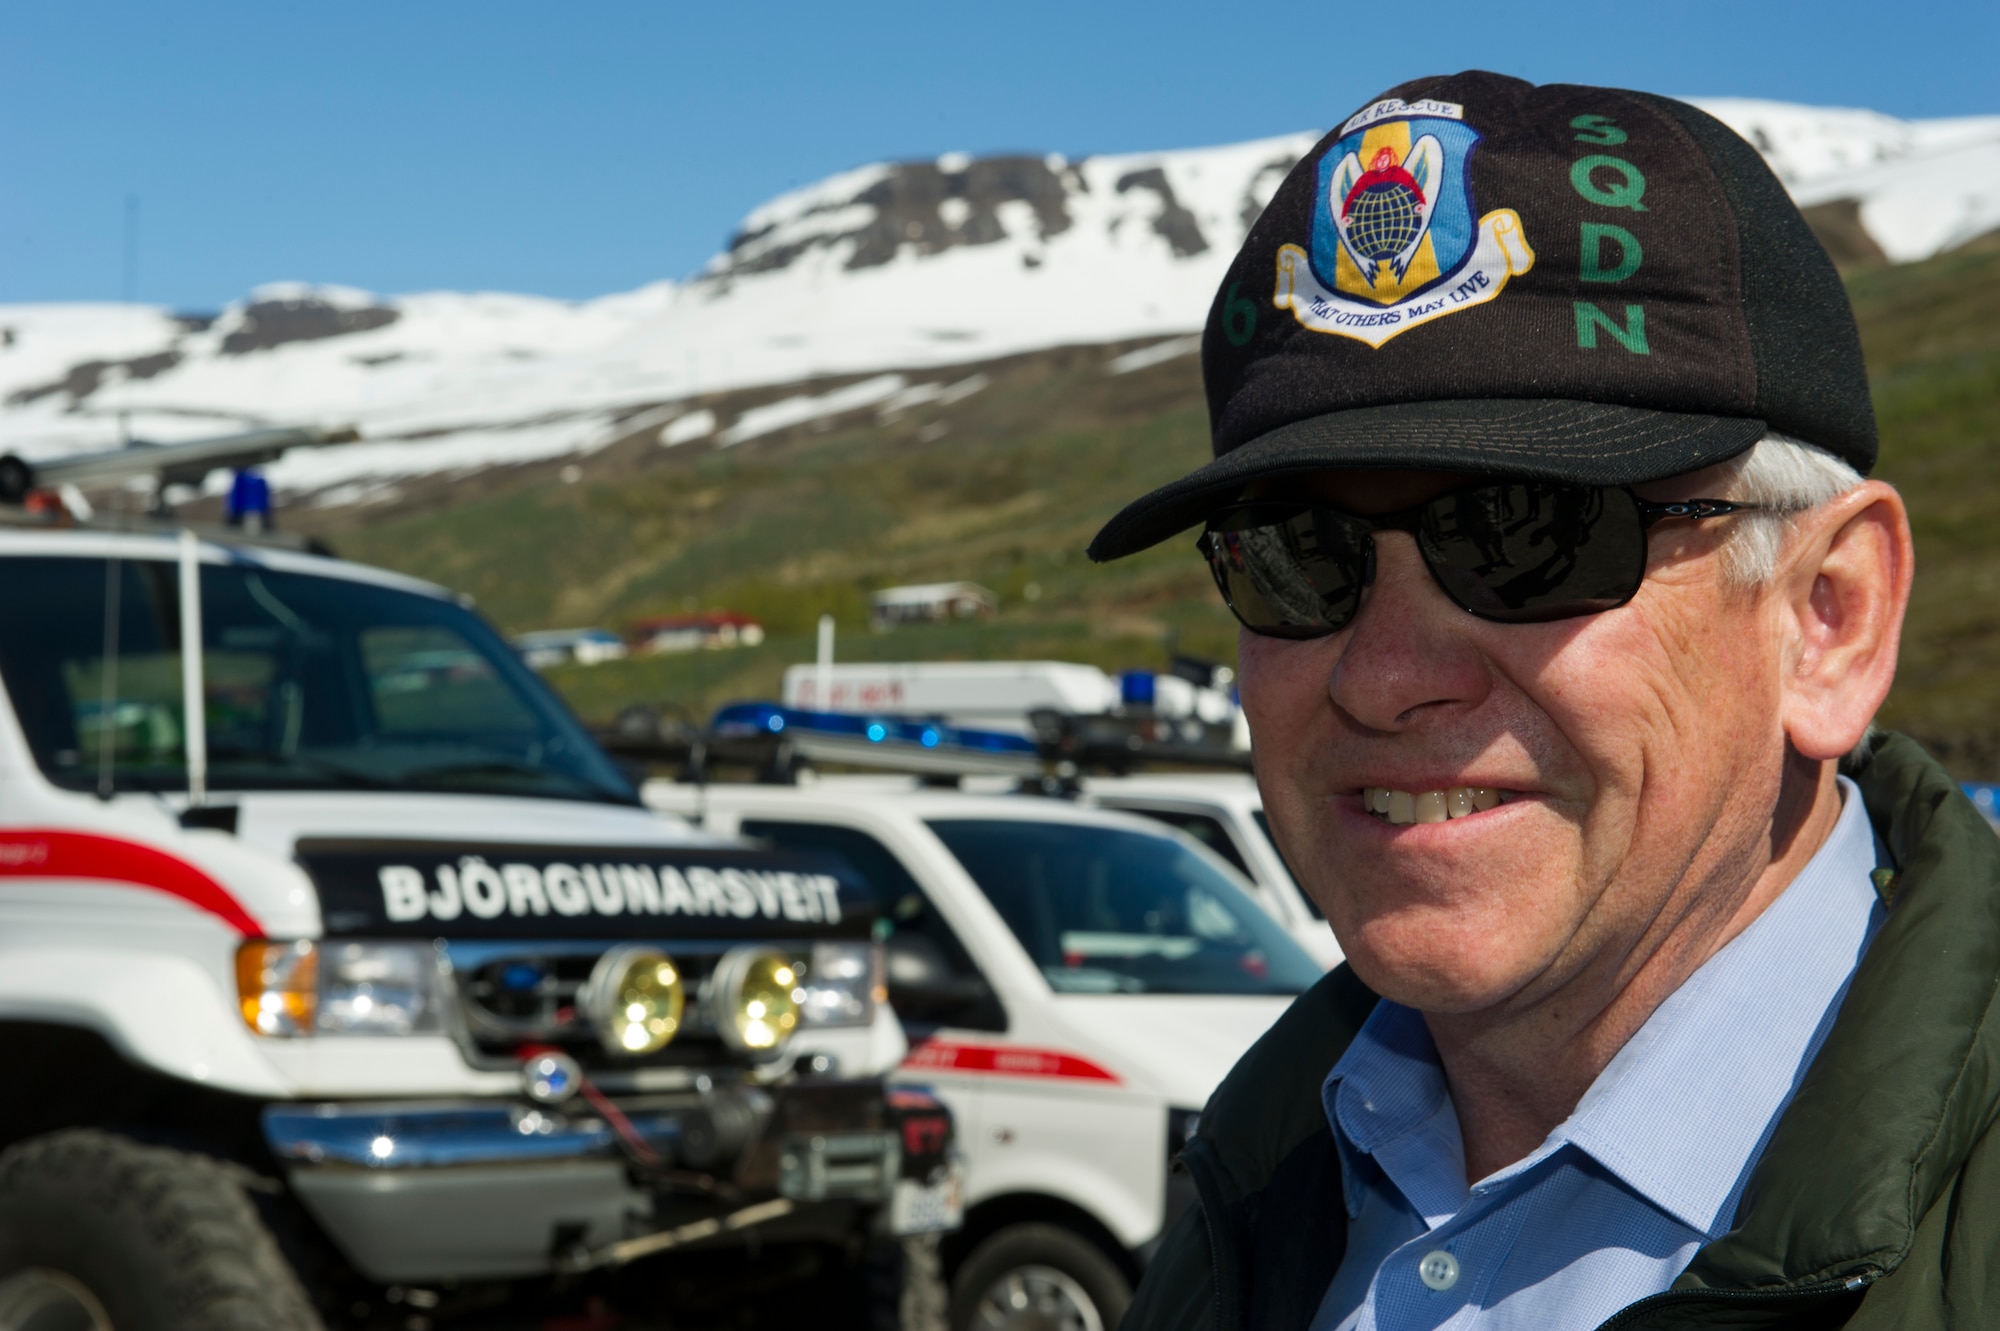 VODLAVIK, Iceland -- Retired Col. Gary Copsey smiles before a ceremony May 30, 2014, commemorating a rescue mission on the coastline of Vodlavik, Iceland. Copsey was an HH-60 pilot during the mission, which saved the lives of six Icelanders stranded aboard their ship, the Godinn. (U.S. Air Force photo/Tech. Sgt. Benjamin Wilson)(Released) 